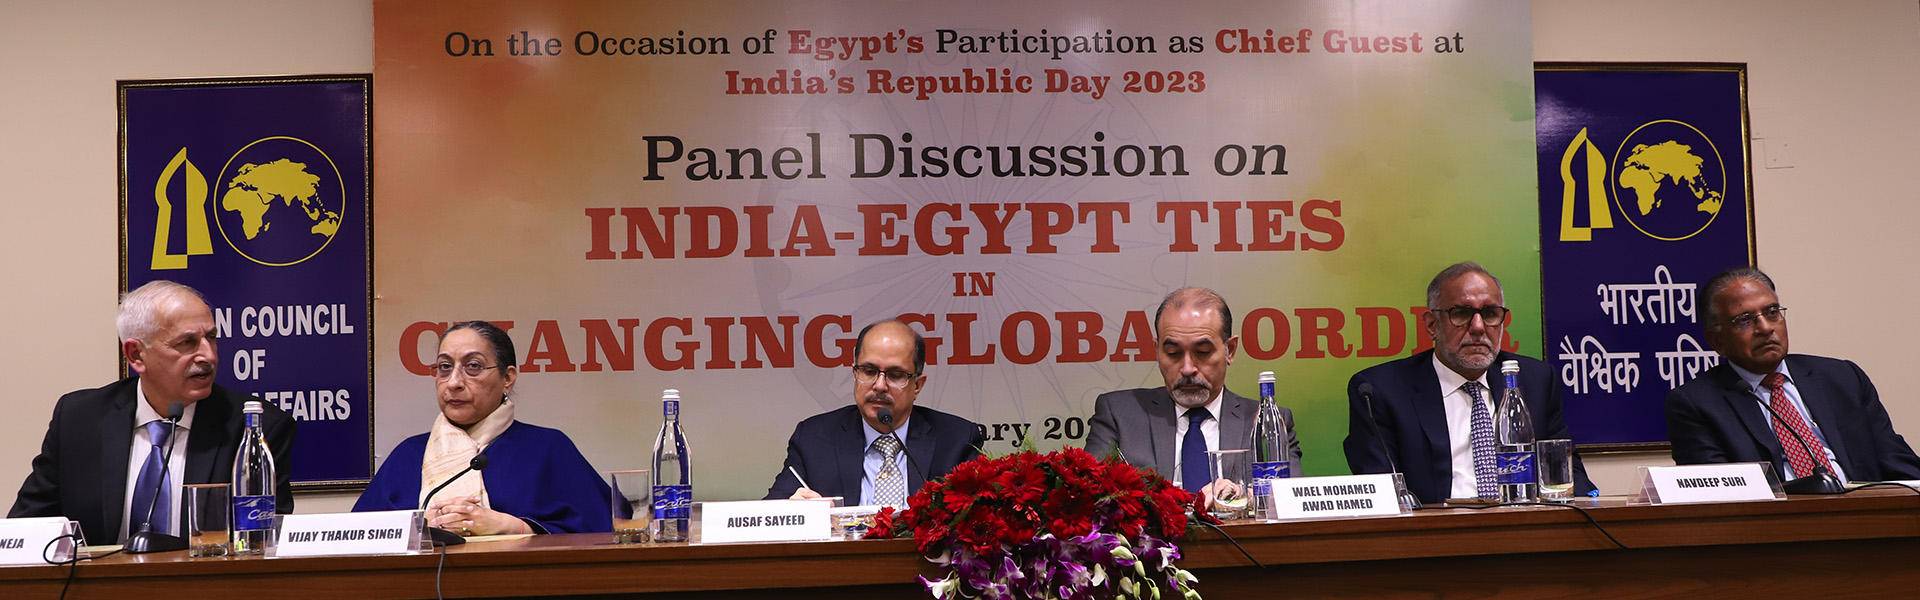 L-R: Mr. Atul Aneja, Editor, India Narrative; Ambassador Vijay Thakur Singh, DG, ICWA; Dr. Ausaf Sayeed, Secretary (CPV & OIA), Ministry of External Affairs, Government of India; H.E. Mr. Wael Mohamed Awad Hamed, Ambassador of Arab Republic of Egypt to India; Amb. Navdeep Suri, Distinguished Fellow, ORF, Former Ambassador of India to Egypt and UAE & Mr. PS Jayaraman, Chairman, TCI Sanmar Chemicals at the Panel Discussion on ‘India-Egypt Ties in Changing Global Order’, 16 January 2023